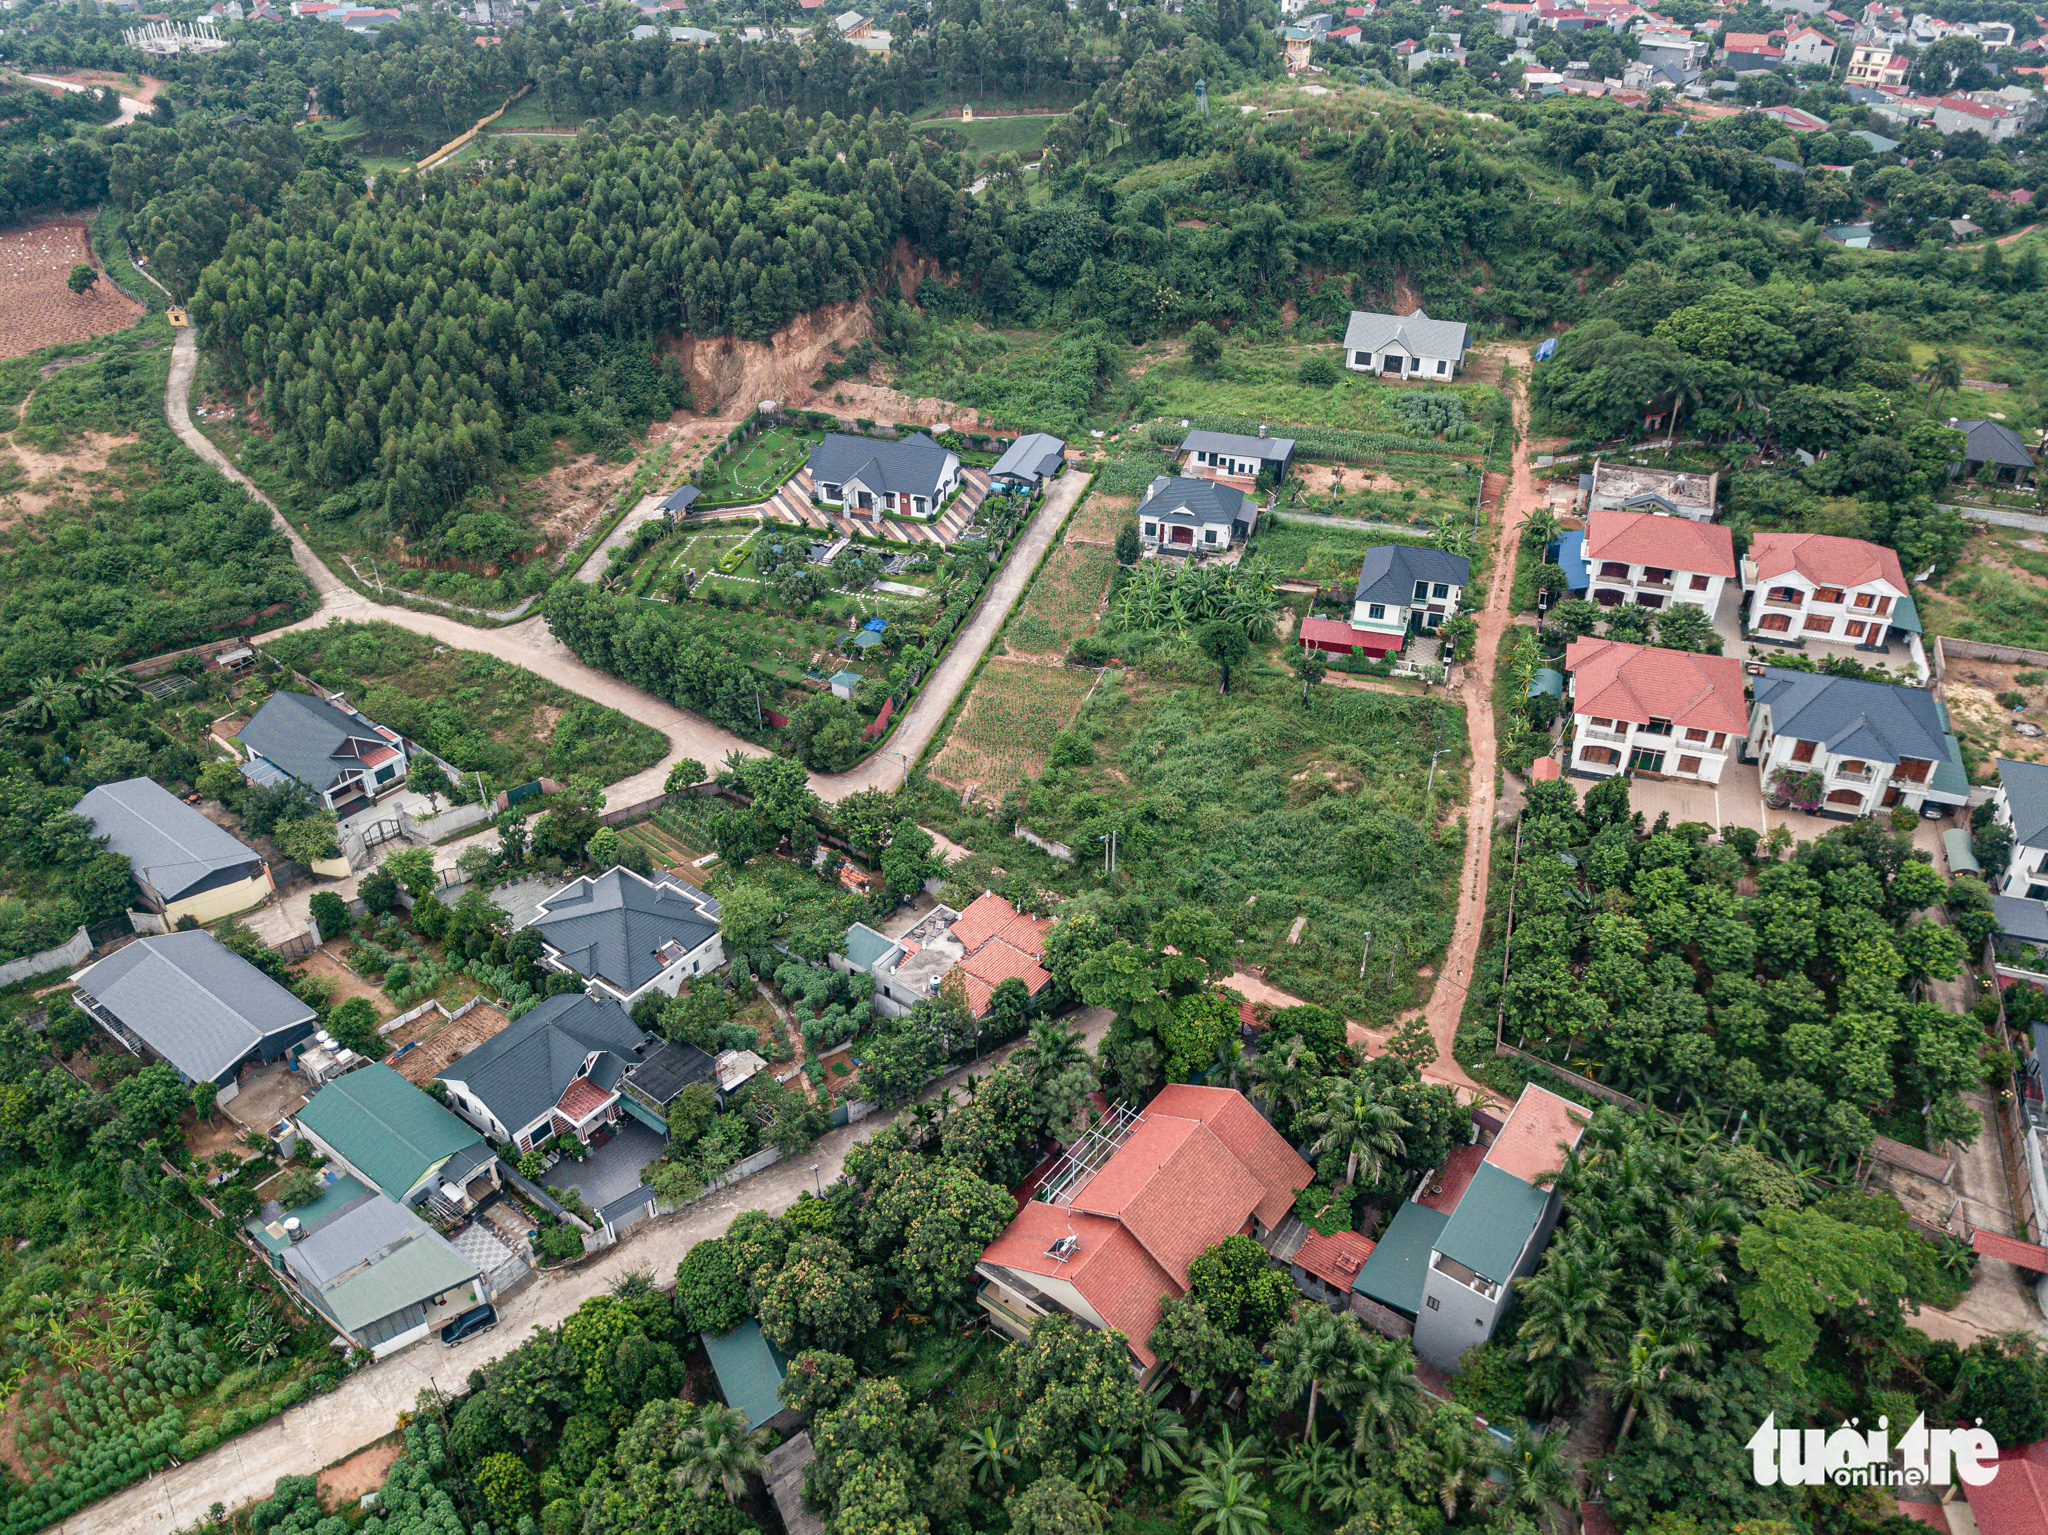 Villas and mansions are seen on the destroyed Dinh mountain in Vinh Phuc Province, Vietnam. Photo: Tuoi Tre